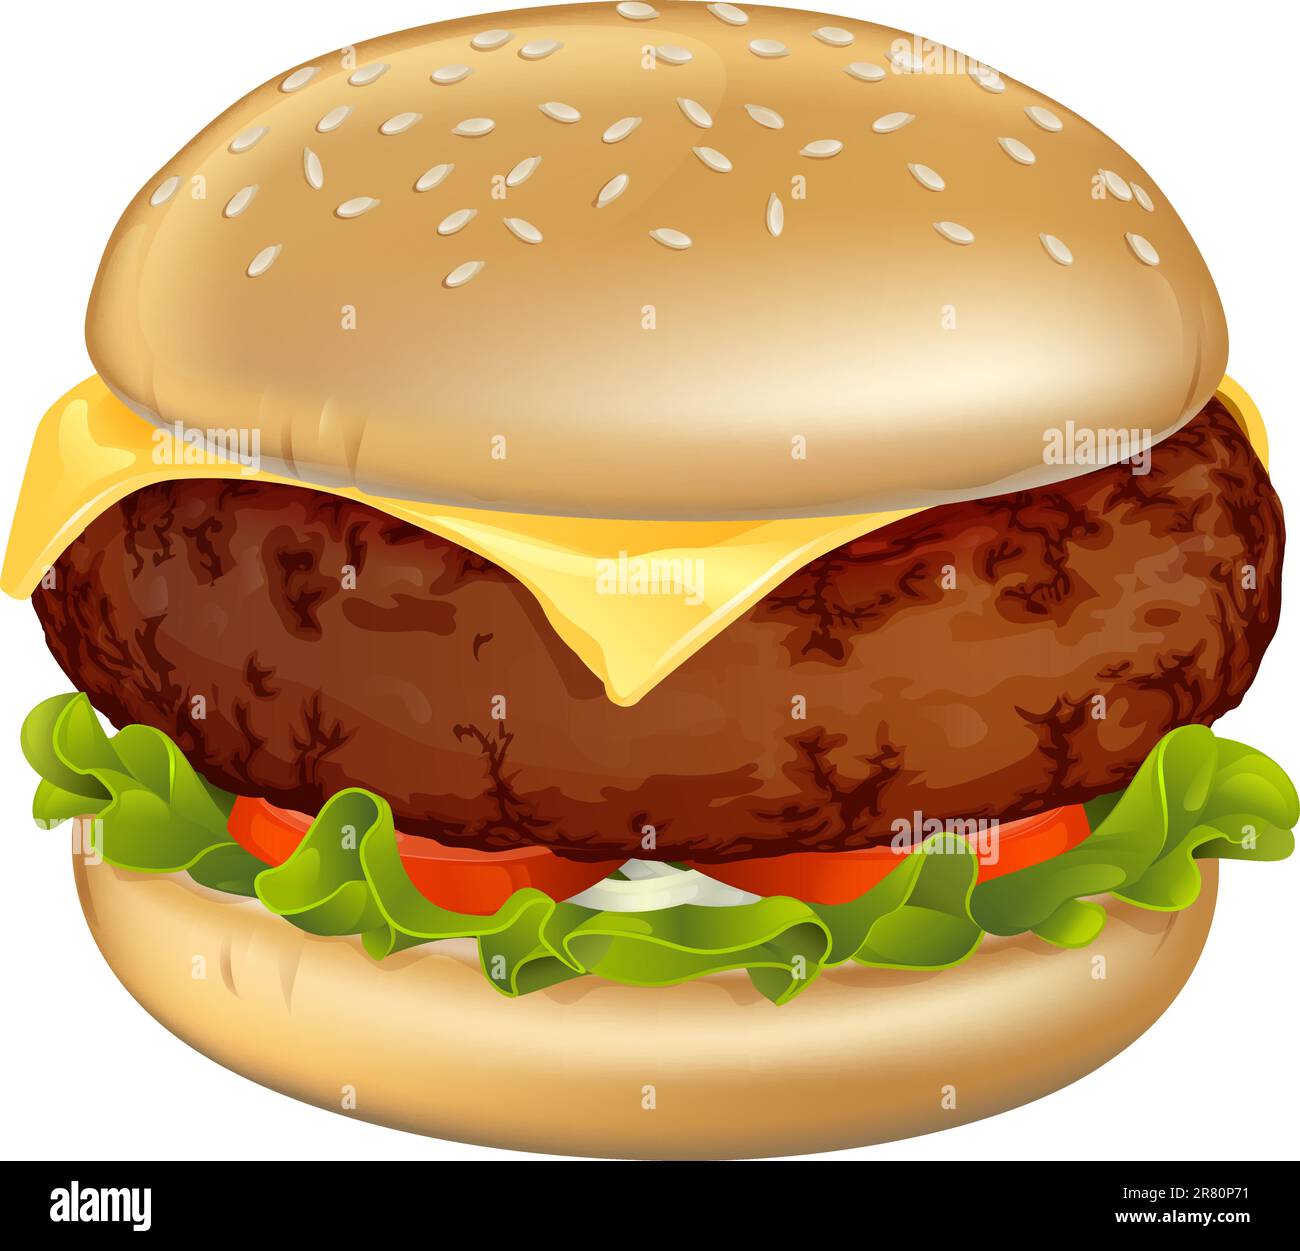 Illustration of a tasty looking classic beef cheeseburger with lettuce, tomato and onion Stock Vector